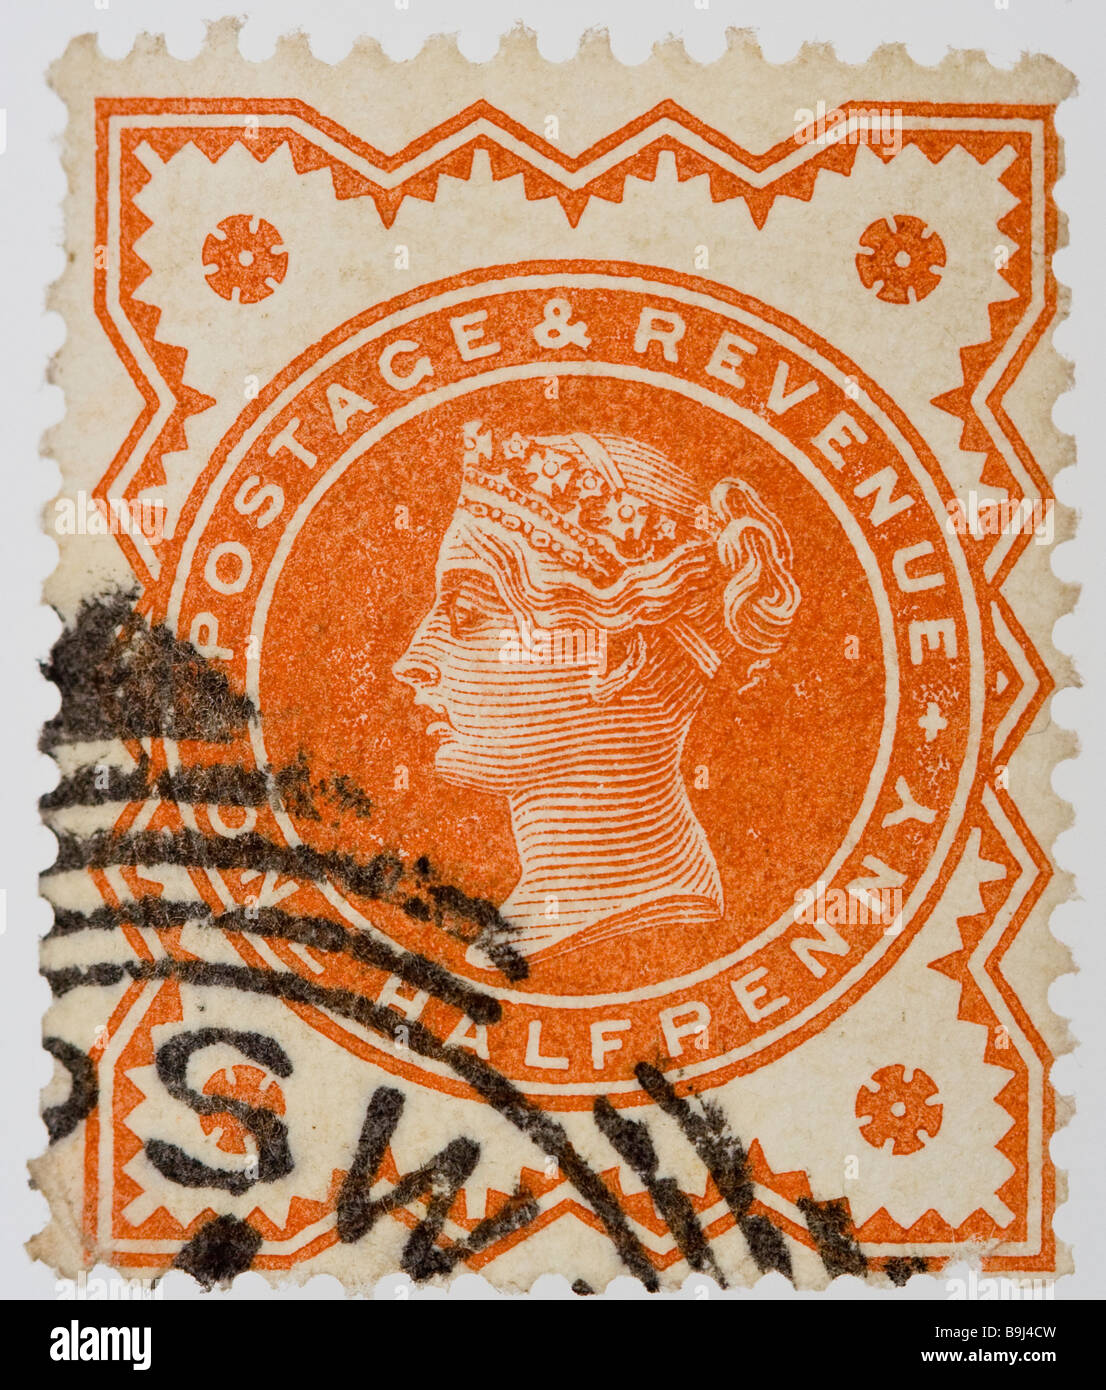 Close up of ½d, one half penny orange Victorian British Postal stamp on  white background issued between 1887-1900, part of the 'Jubilee Issue'.  Used Stock Photo - Alamy